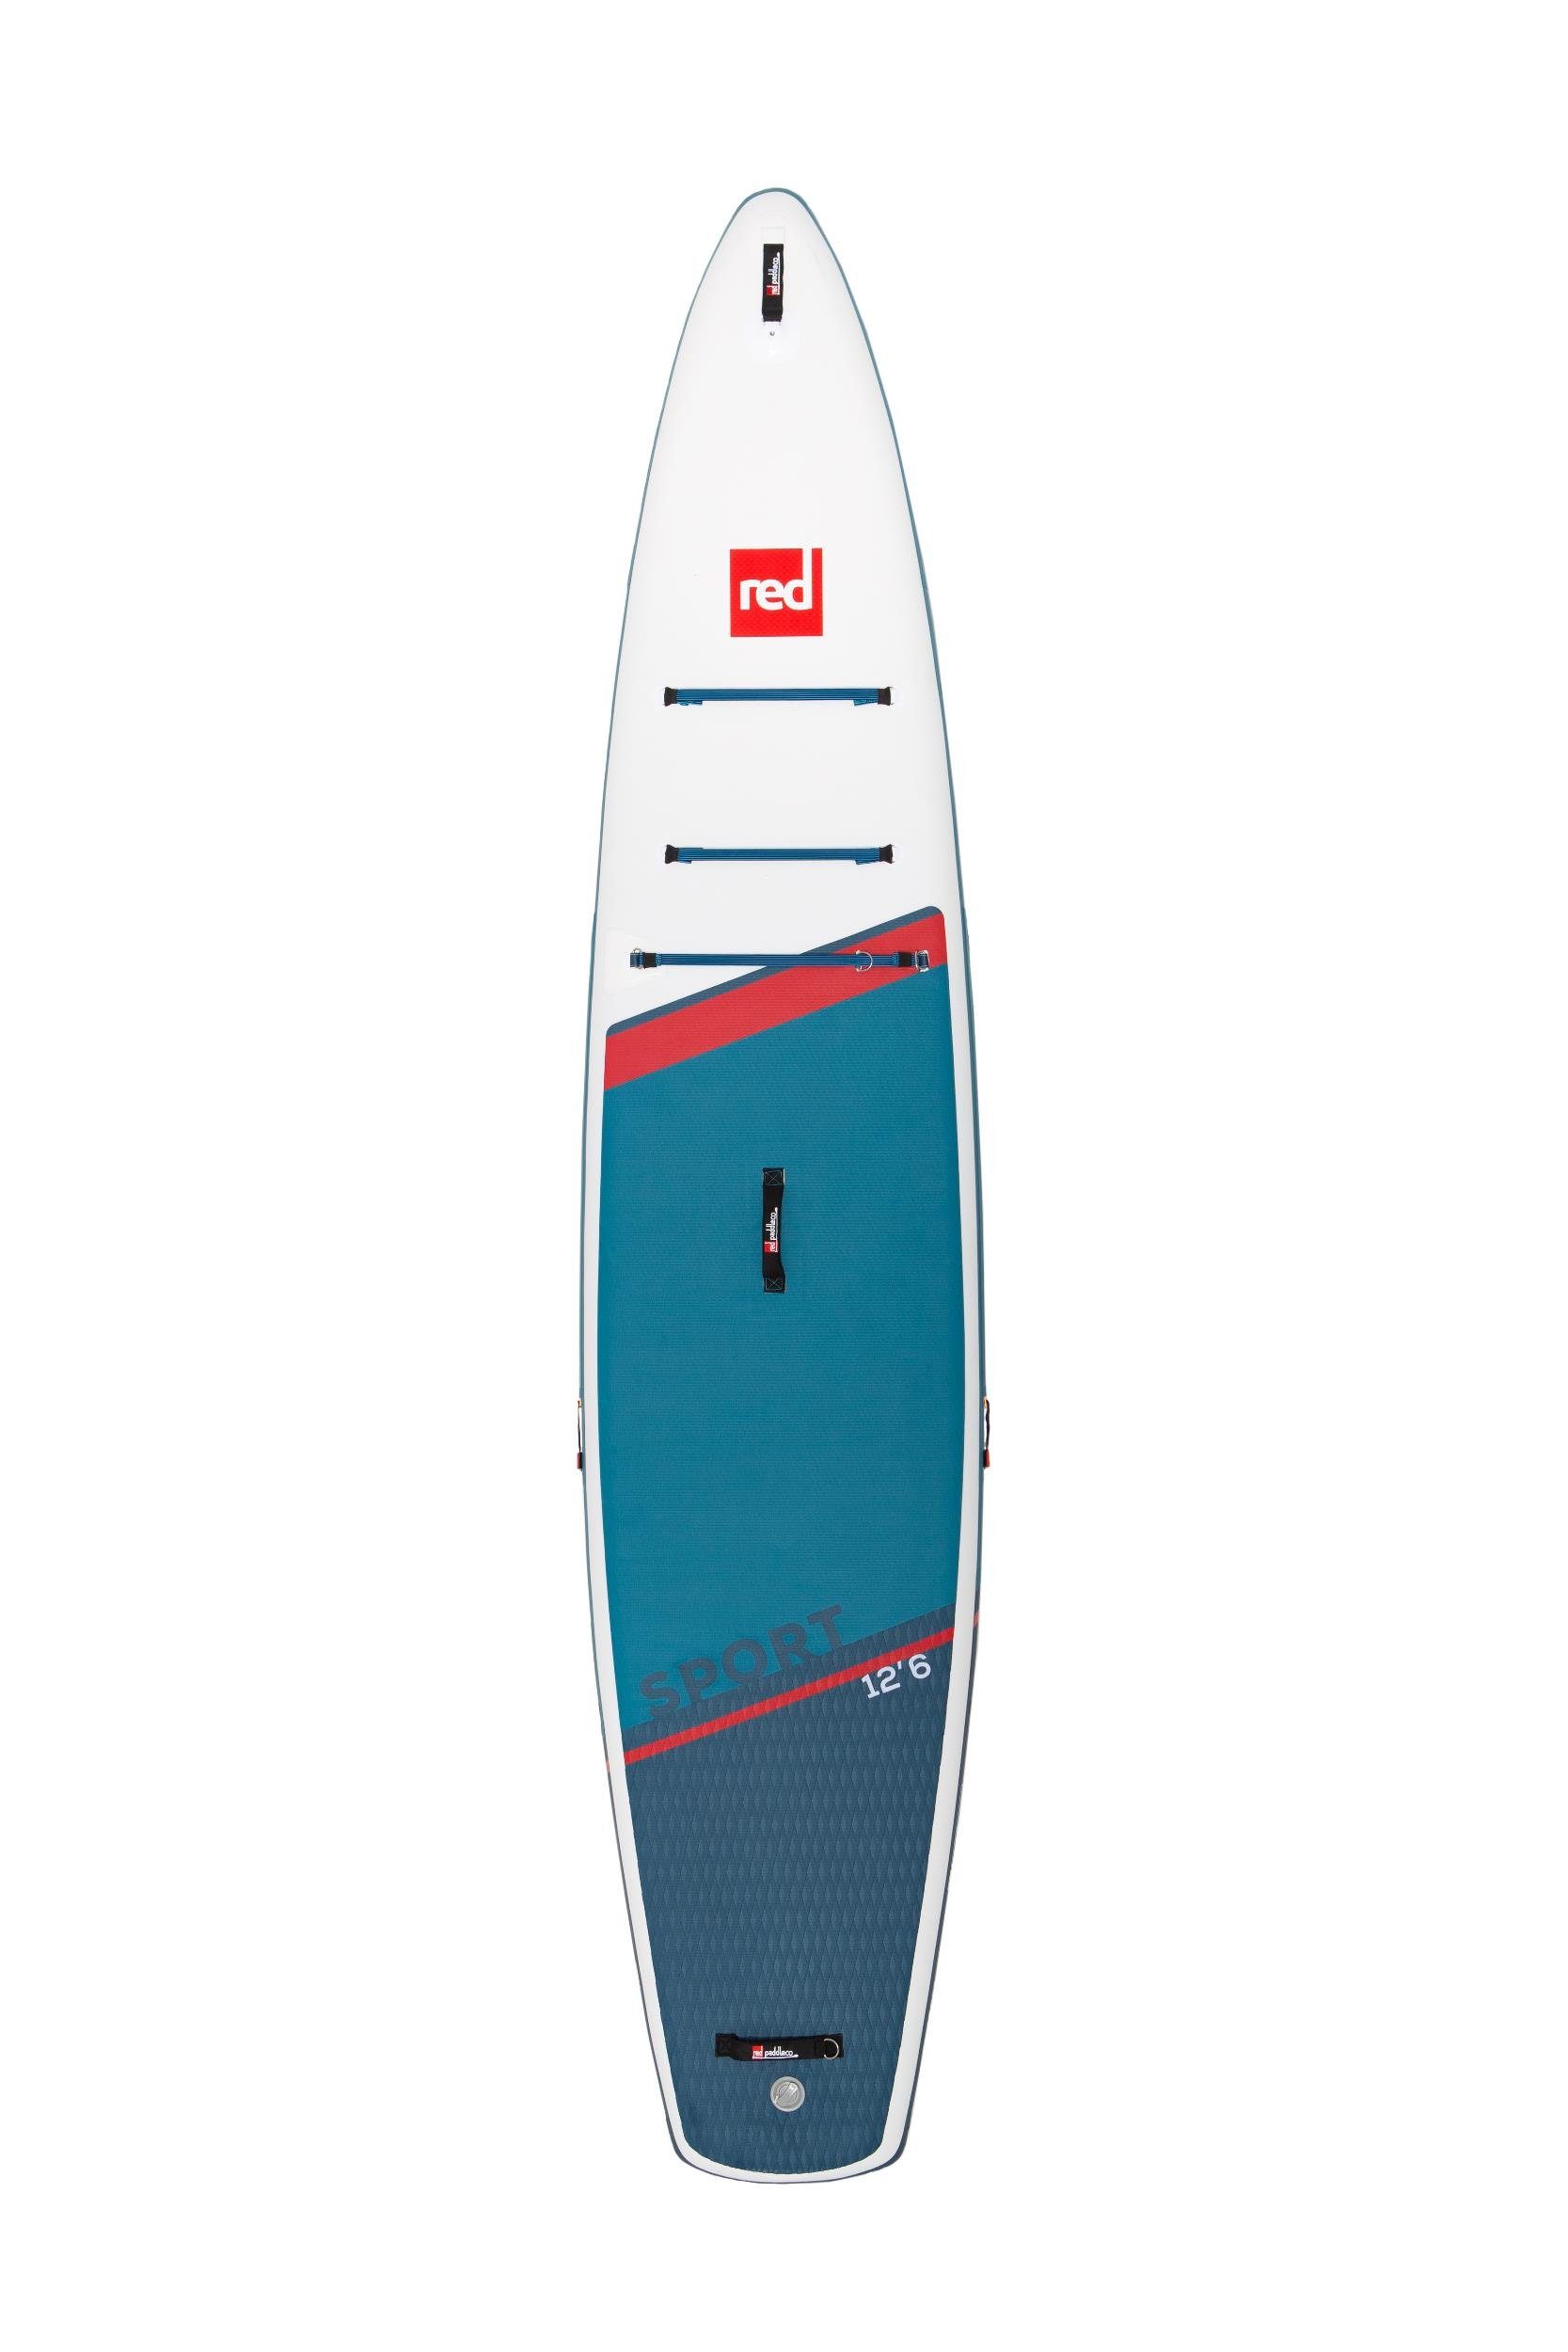 Co x Paddle 30" Red x SUP Paddle MSL 12'6" SUP-Board SET Red 6" SPORT